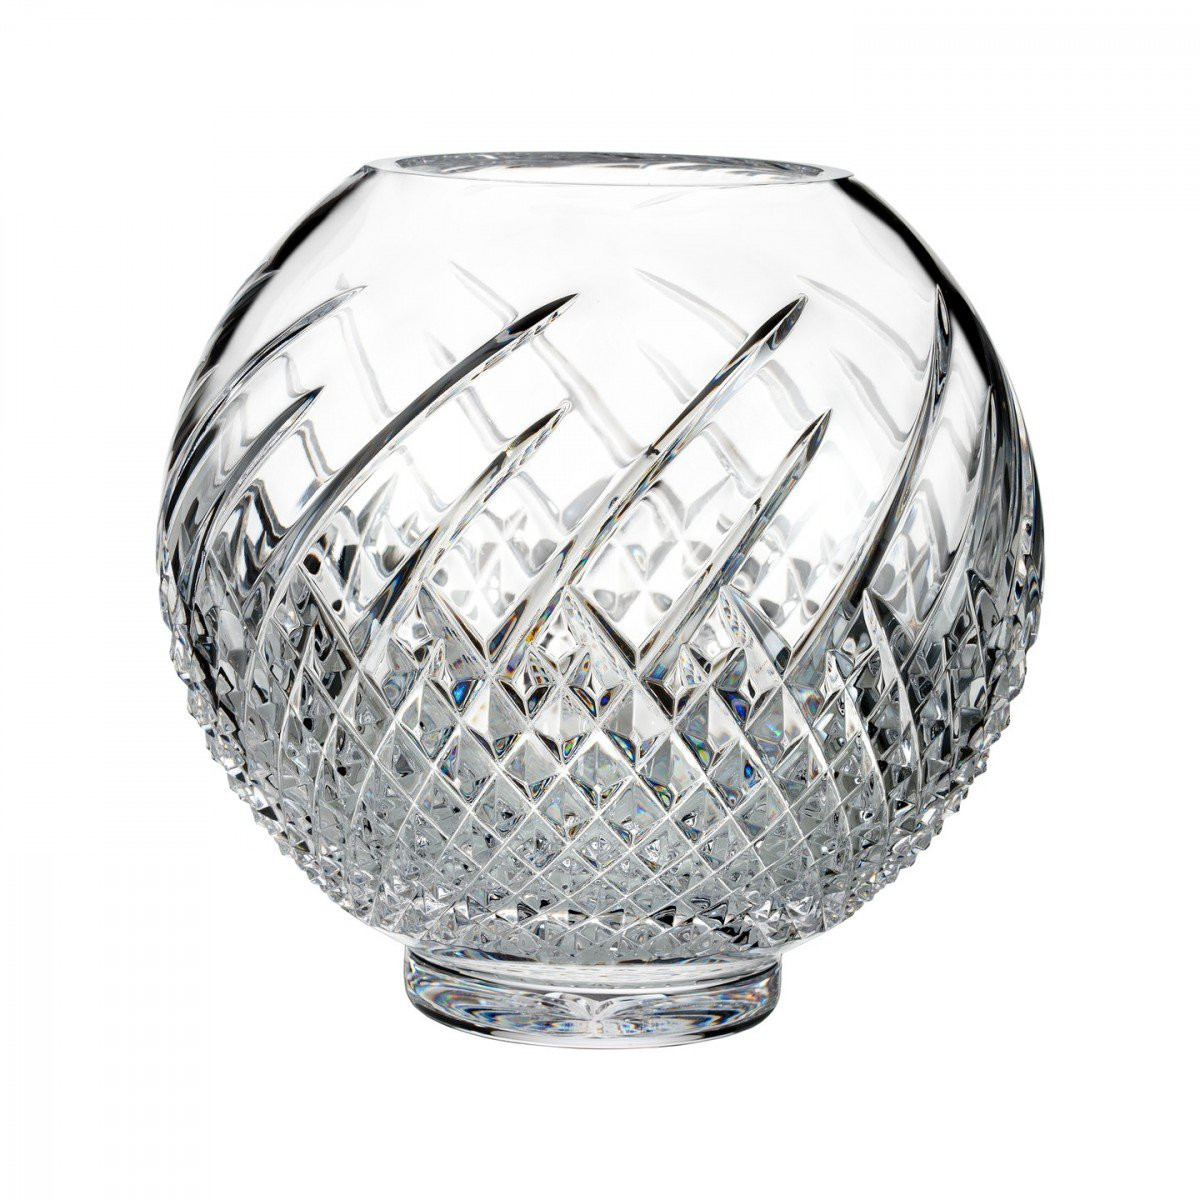 30 Great Marquis by Waterford Rainfall Vase 11 2024 free download marquis by waterford rainfall vase 11 of wild atlantic way rose bowl house of waterford crystal us in wild atlantic way rose bowl